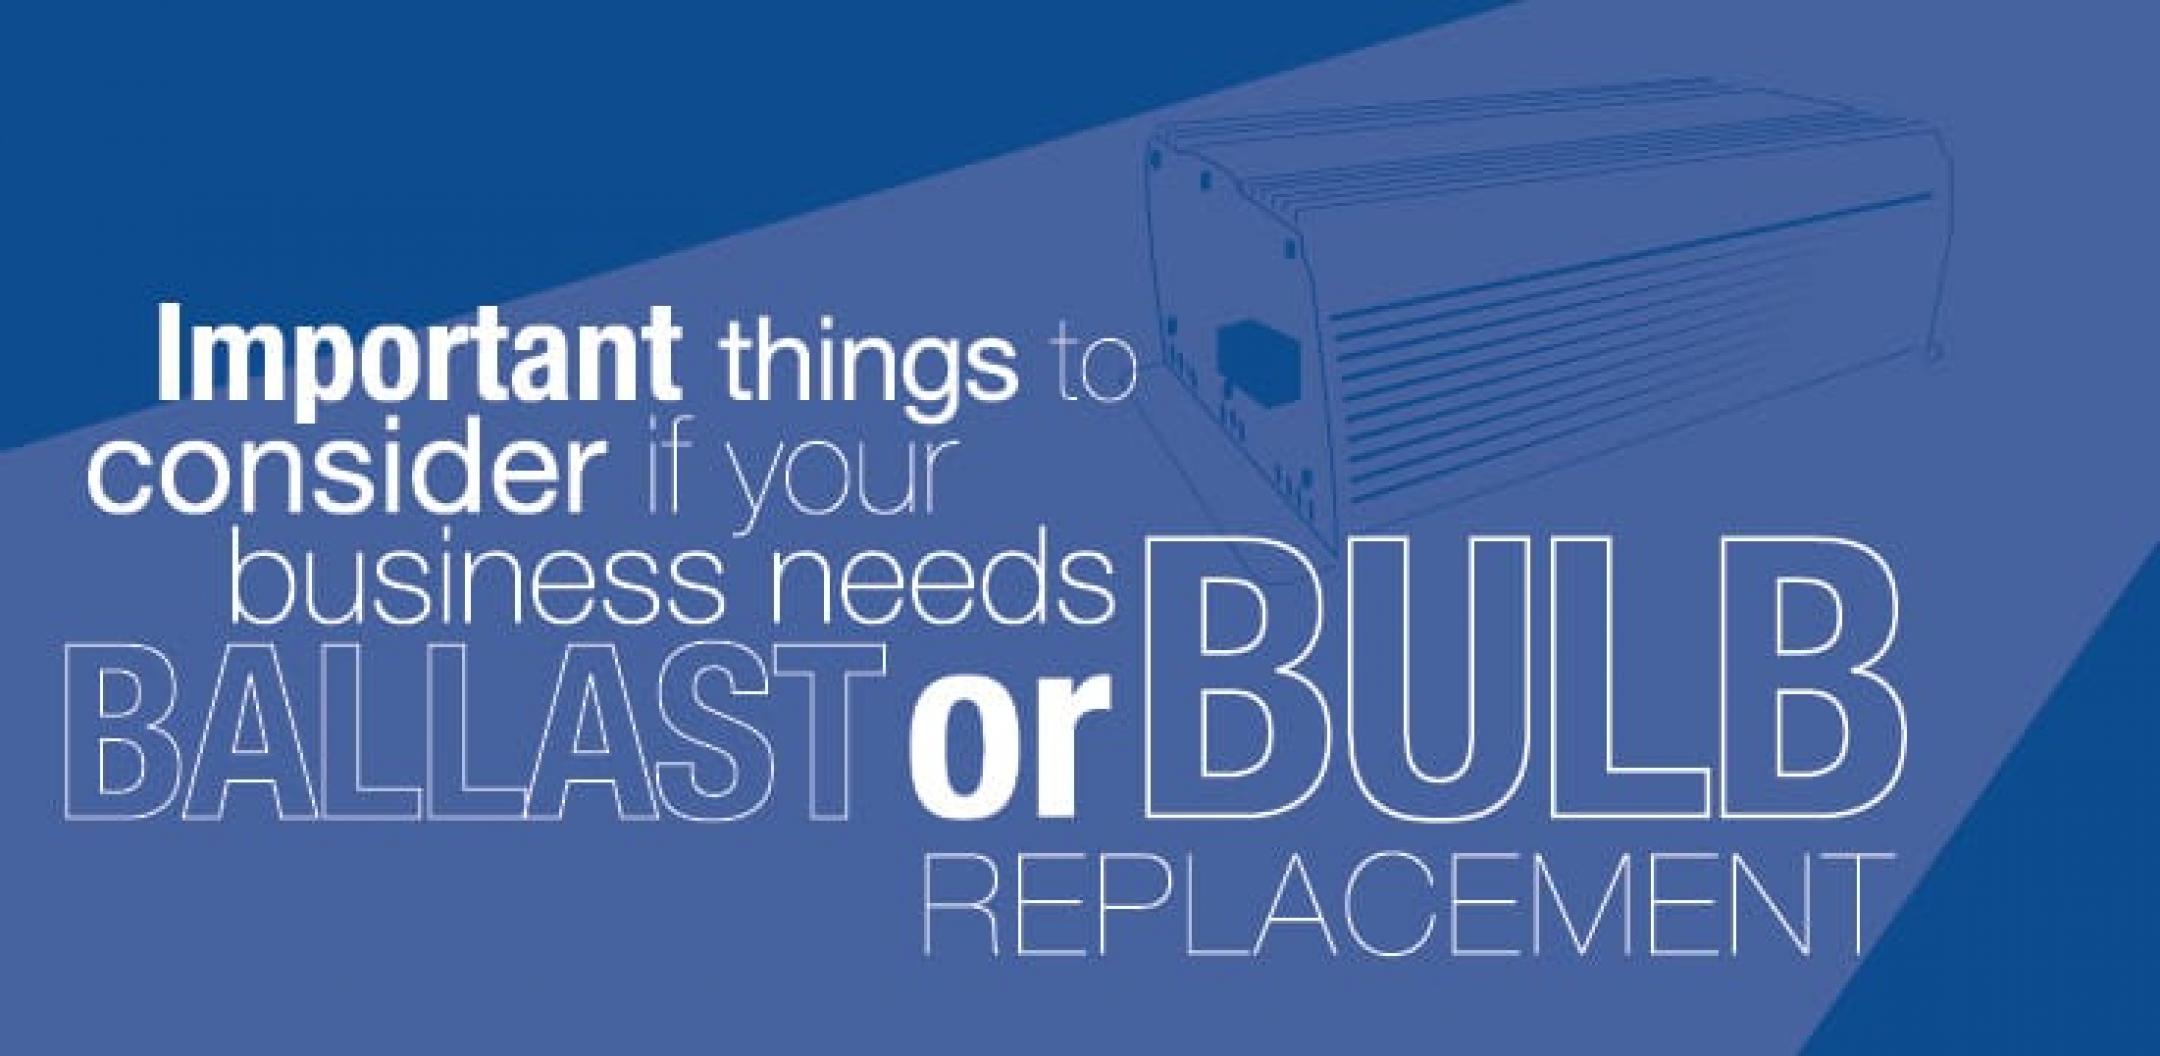 What to Know About Ballast and Bulb Replacement?